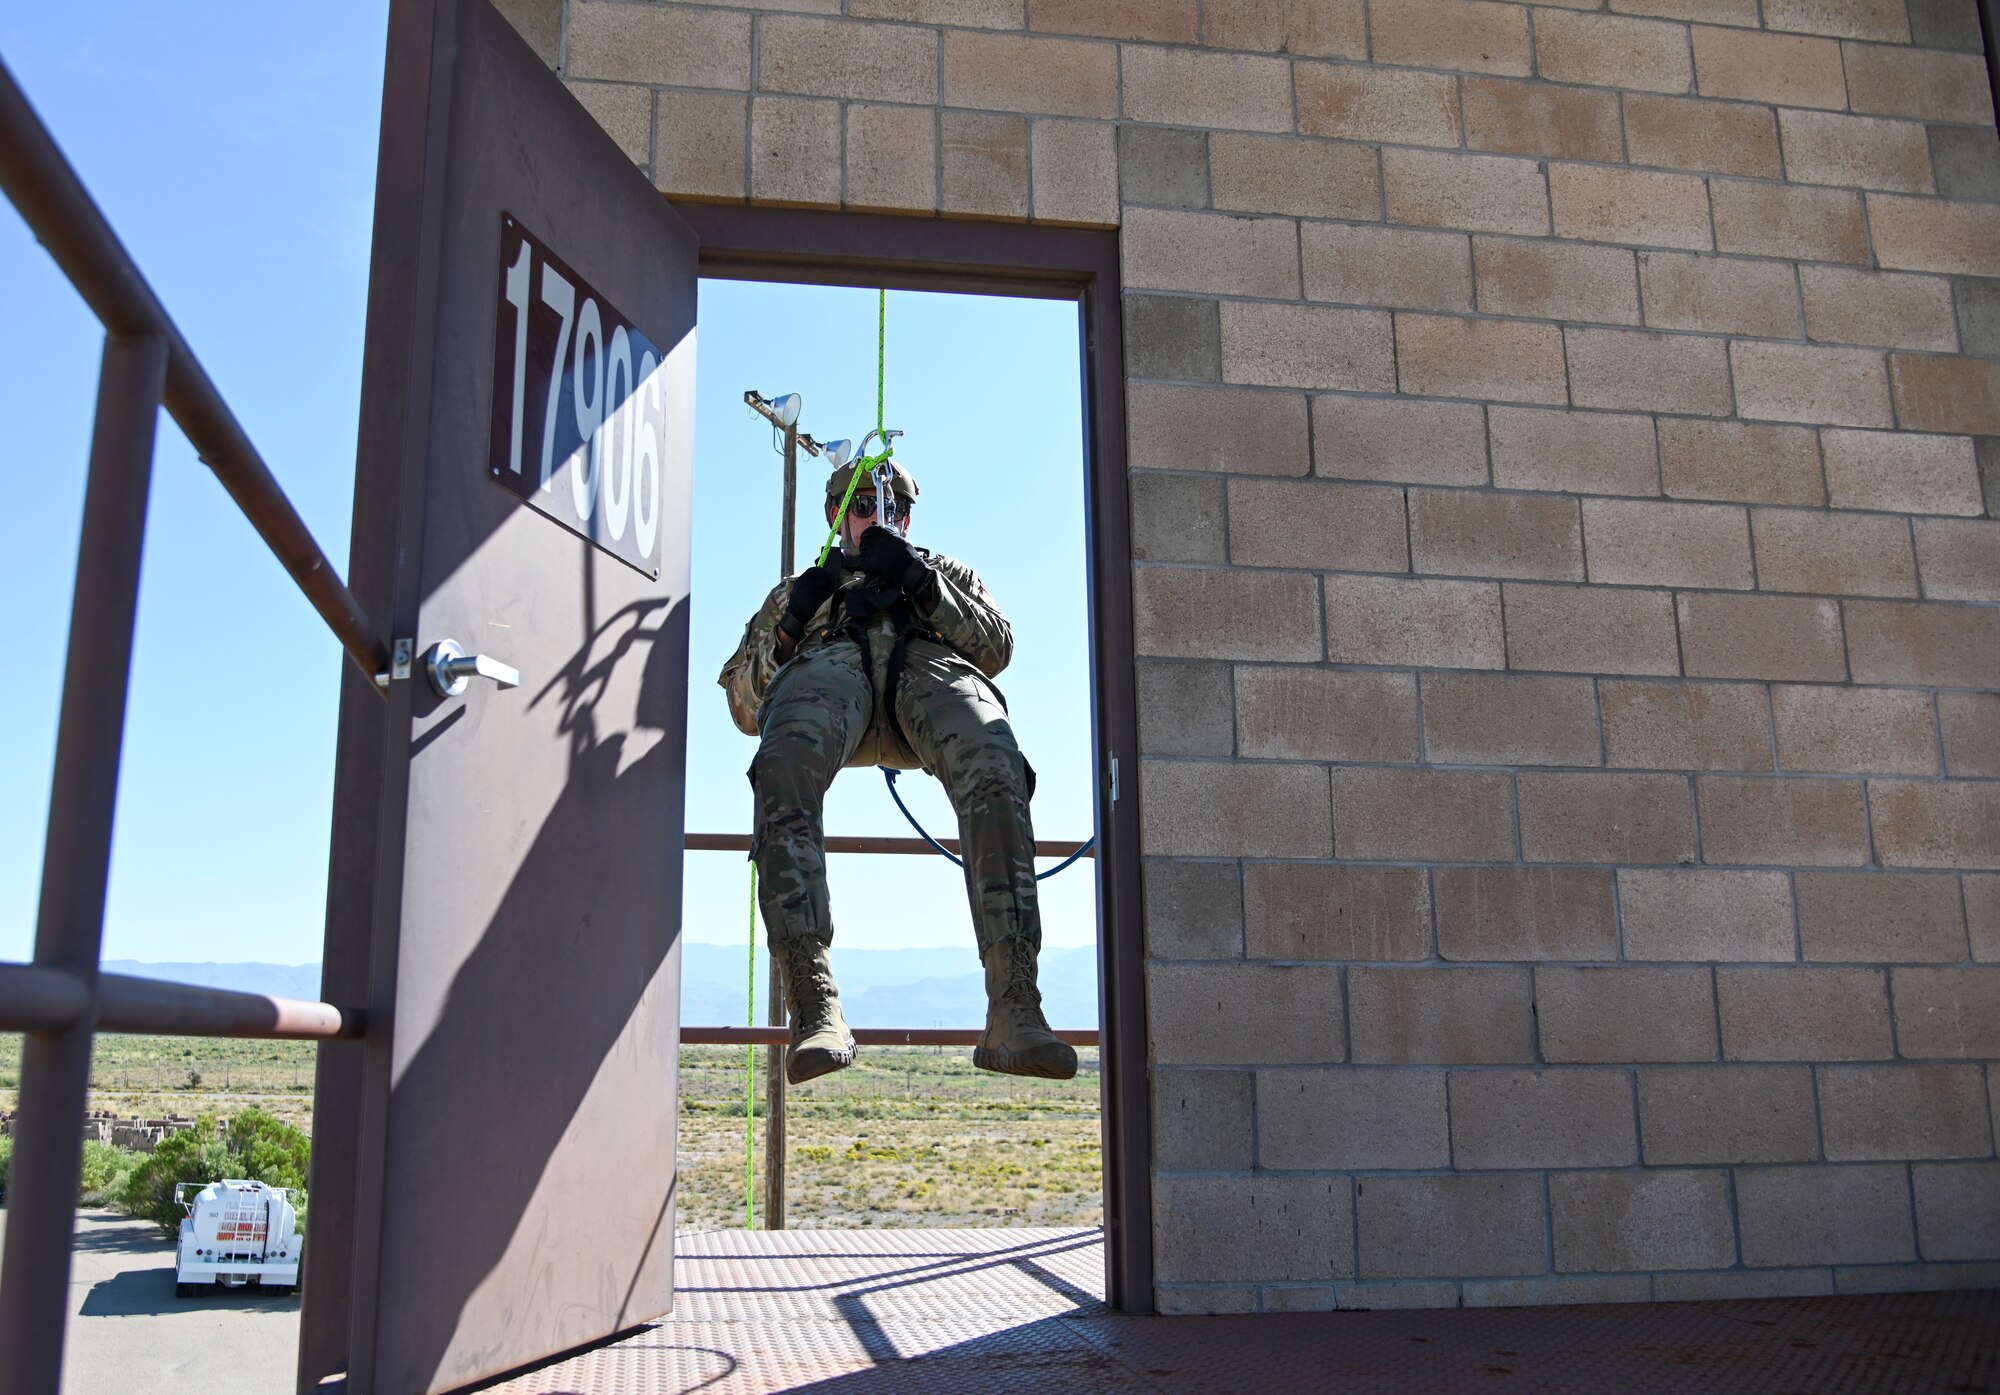 Senior Airman William Rivera Solis, 49th Security Forces Squadron patrolman, practices breaching through a doorway during rappel skills training, Oct. 5, 2021, on Holloman Air Force Base, New Mexico. The rappel skills training was the first of its kind for the 49th Wing. (U.S. Air Force photo by Airman 1st Class Jessica Sanchez-Chen)